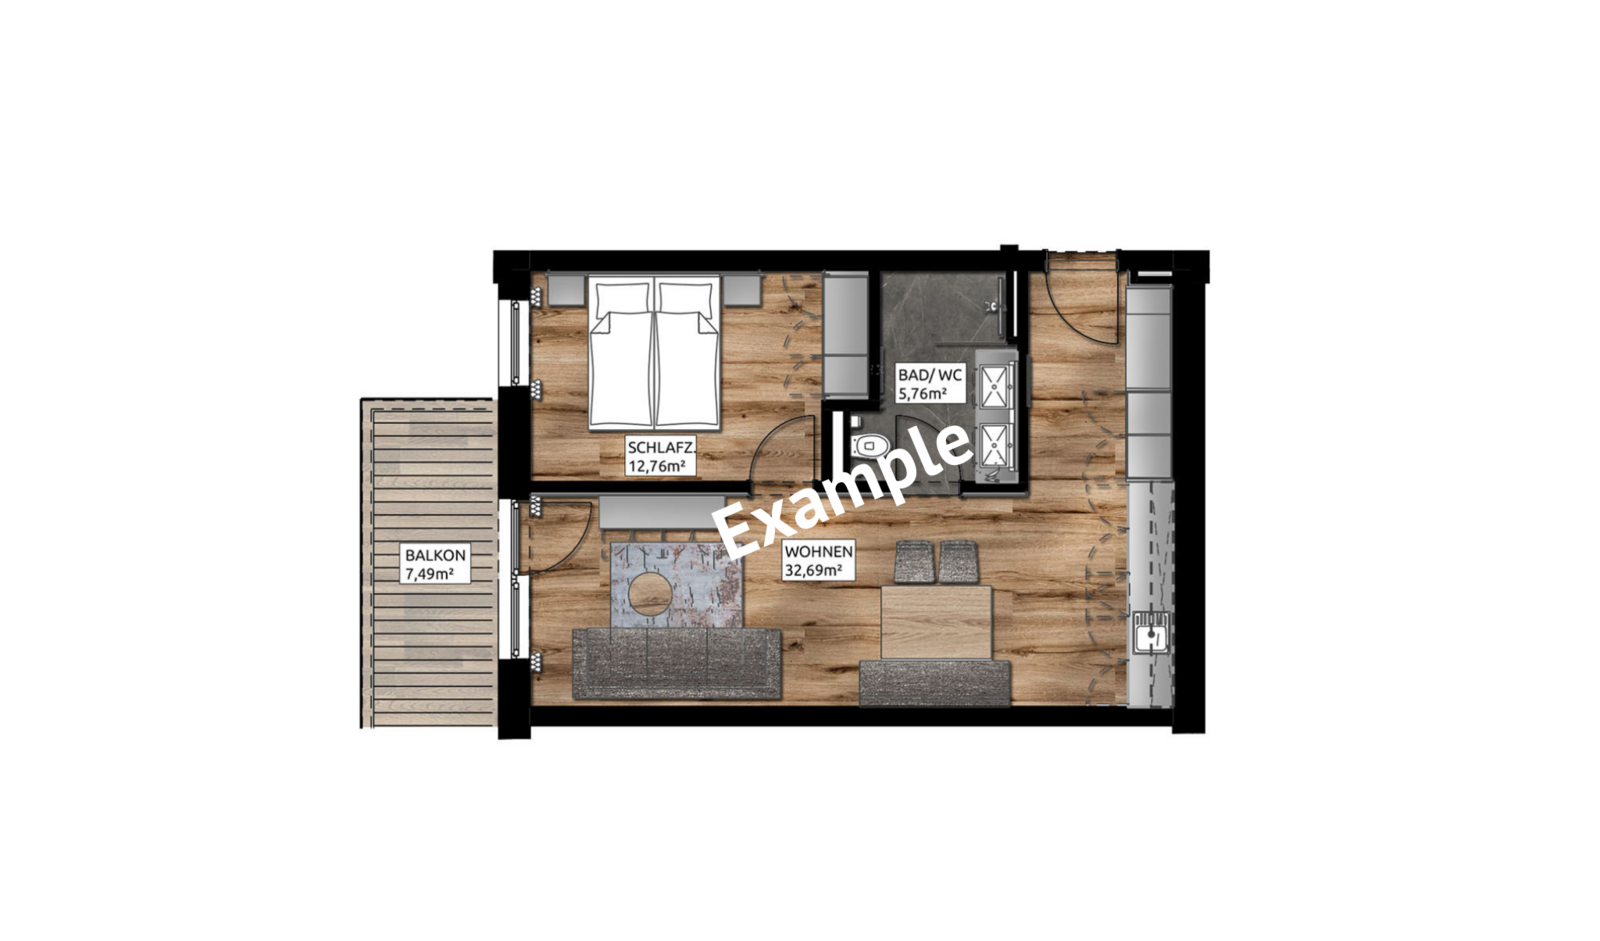 Appartement | 2-4 pers.